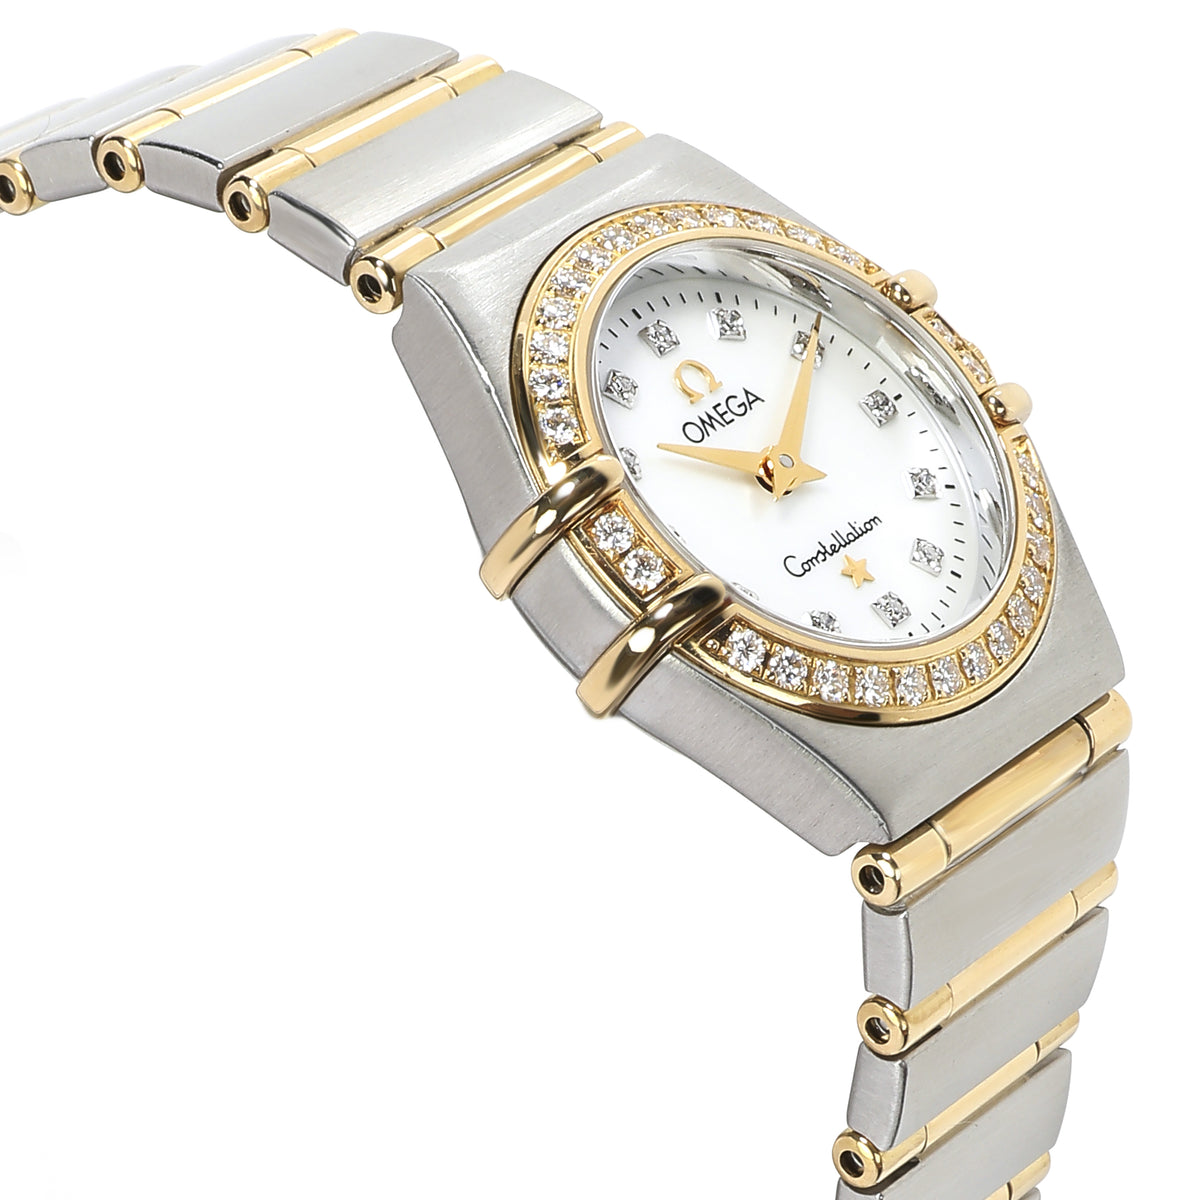 Omega Constellation 1267.75.00 Women's Watch in 18kt Stainless Steel/Yellow Gold